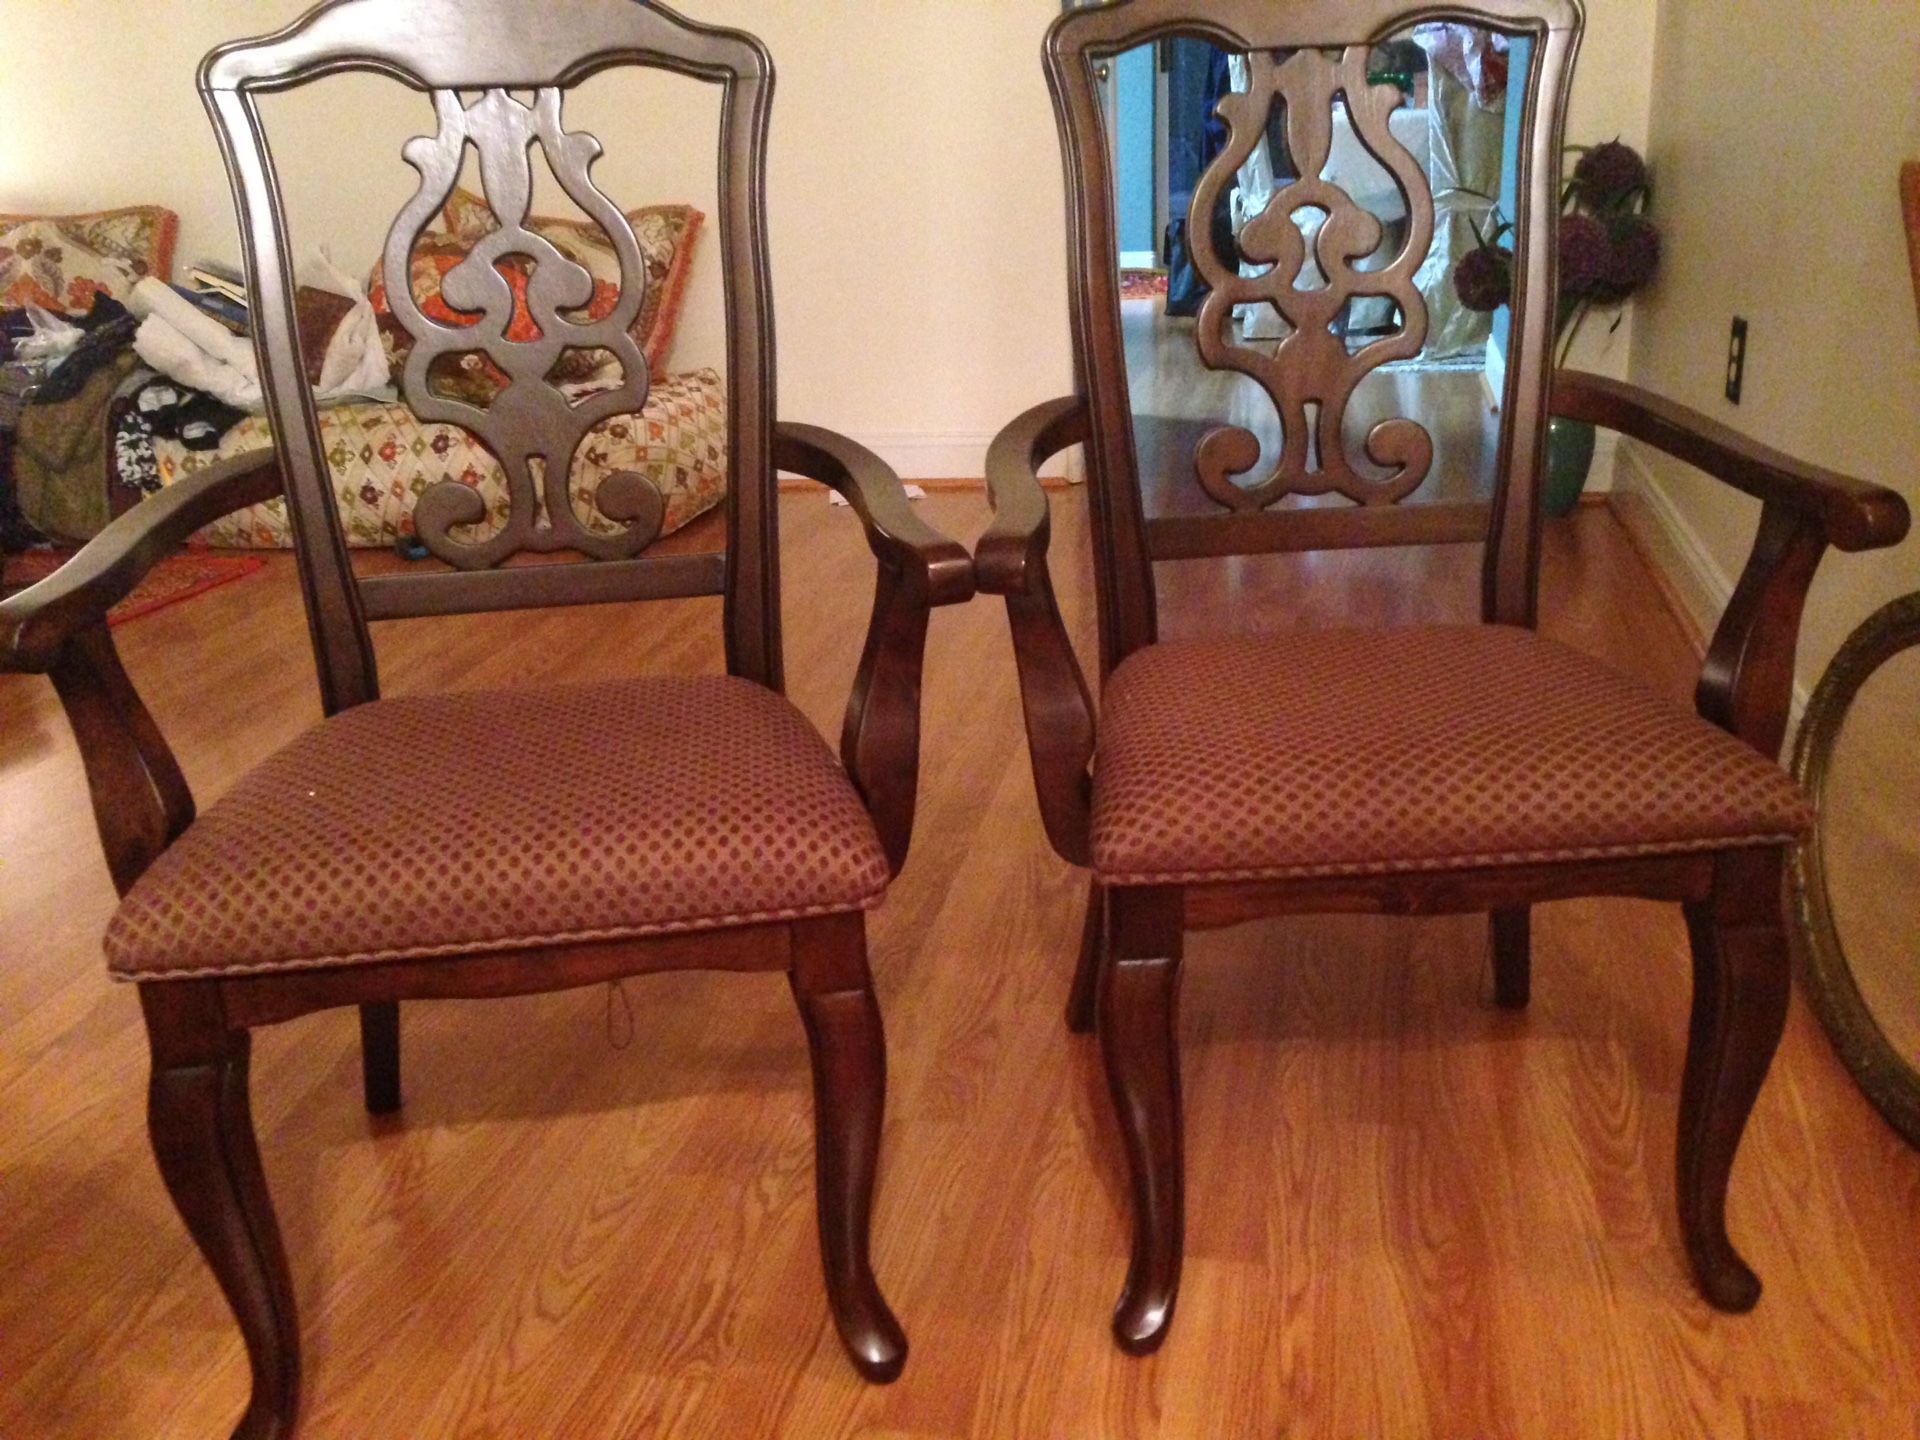 2 Arm chairs from Ashley store